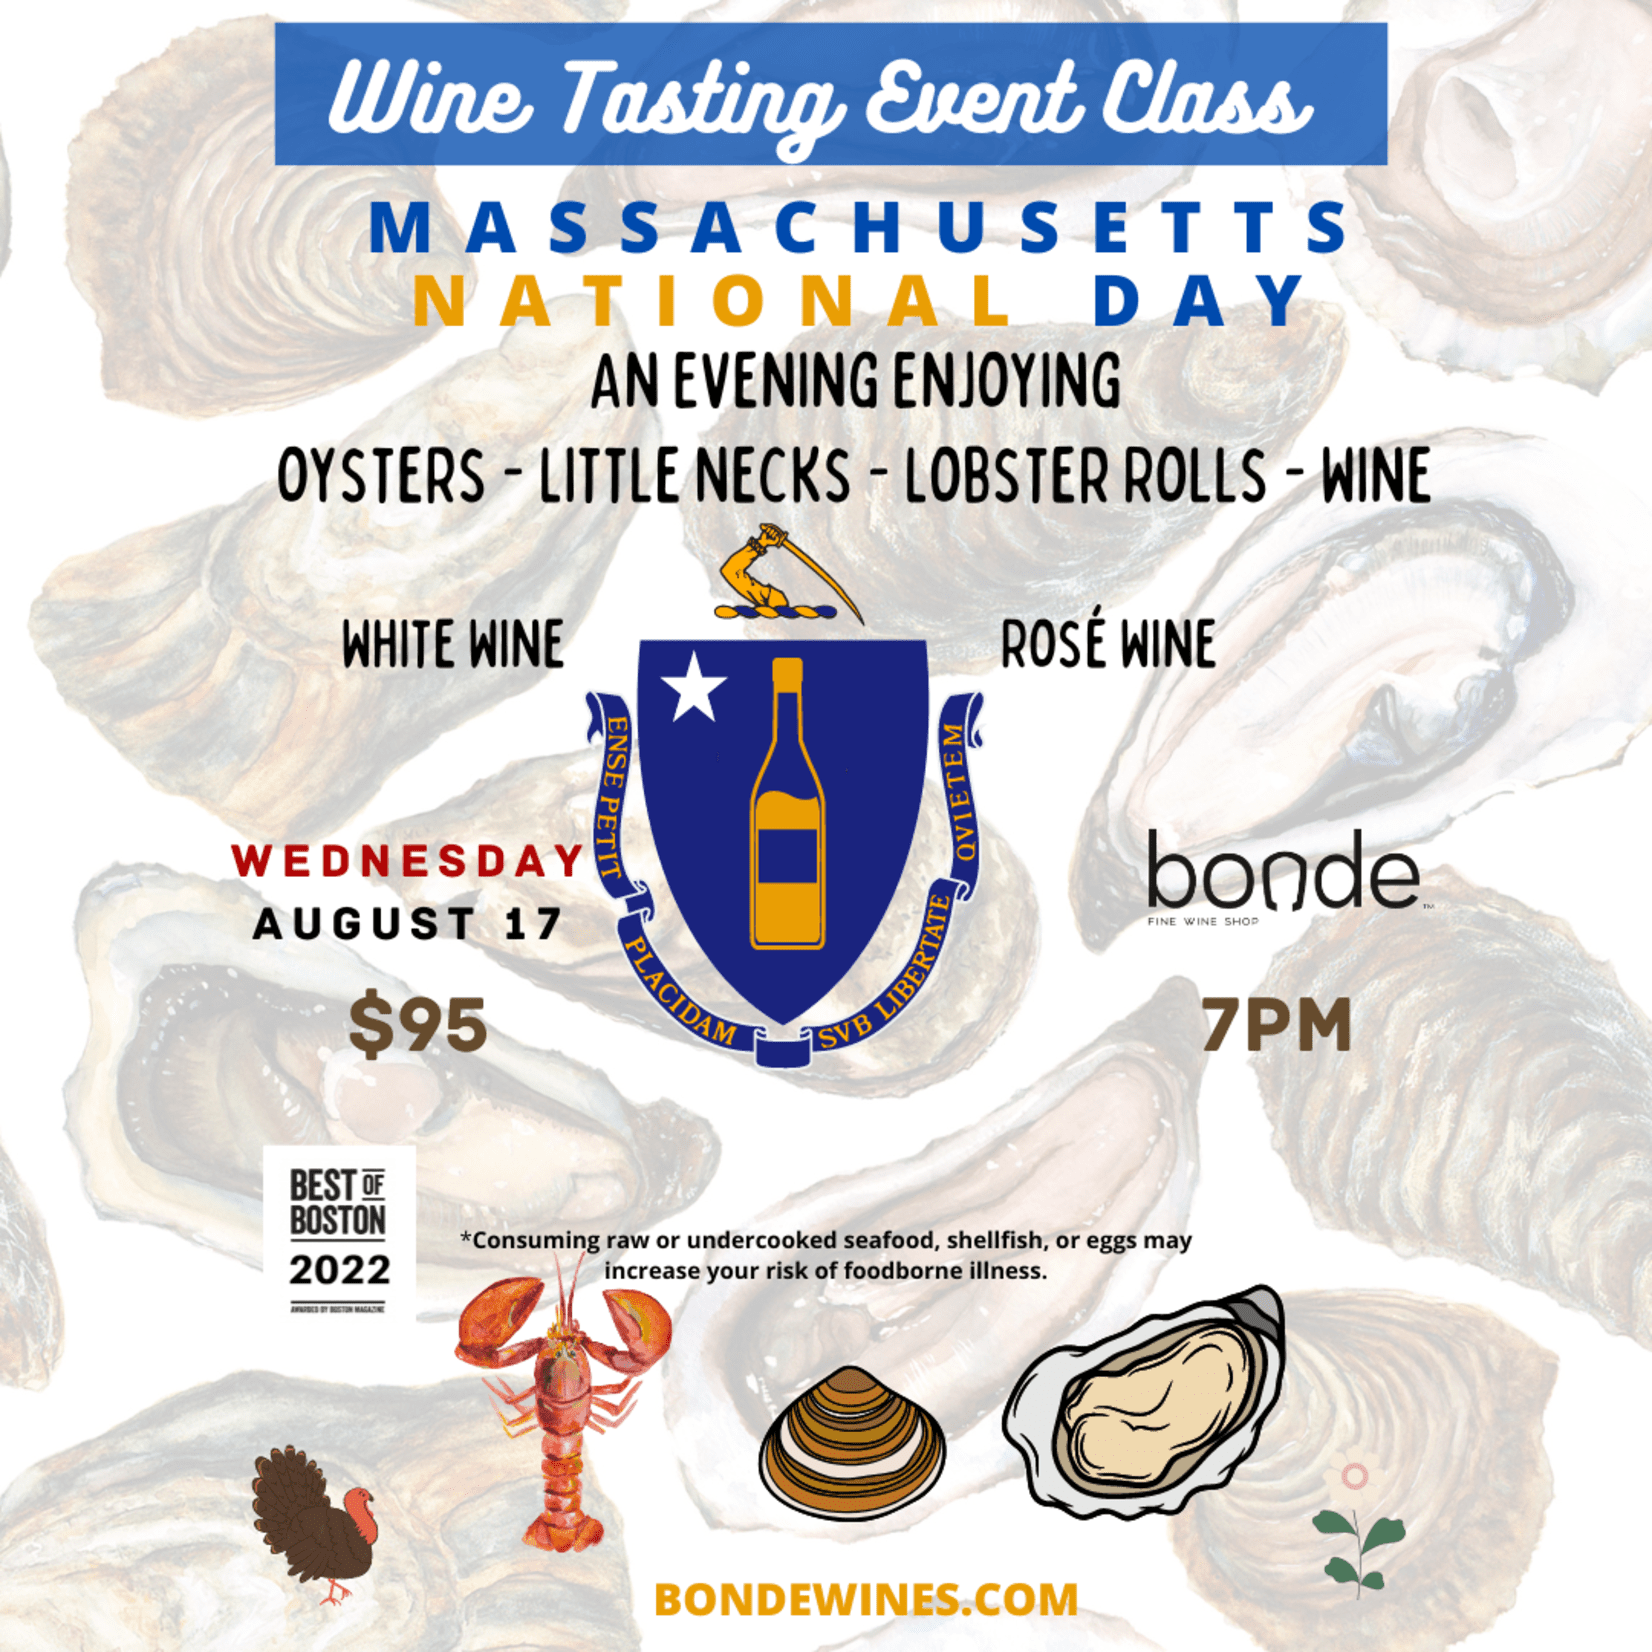 Wine Tasting - National Massachusetts Day: Wine and Seafood - Wednesday, August 17 - 7:00 p.m.